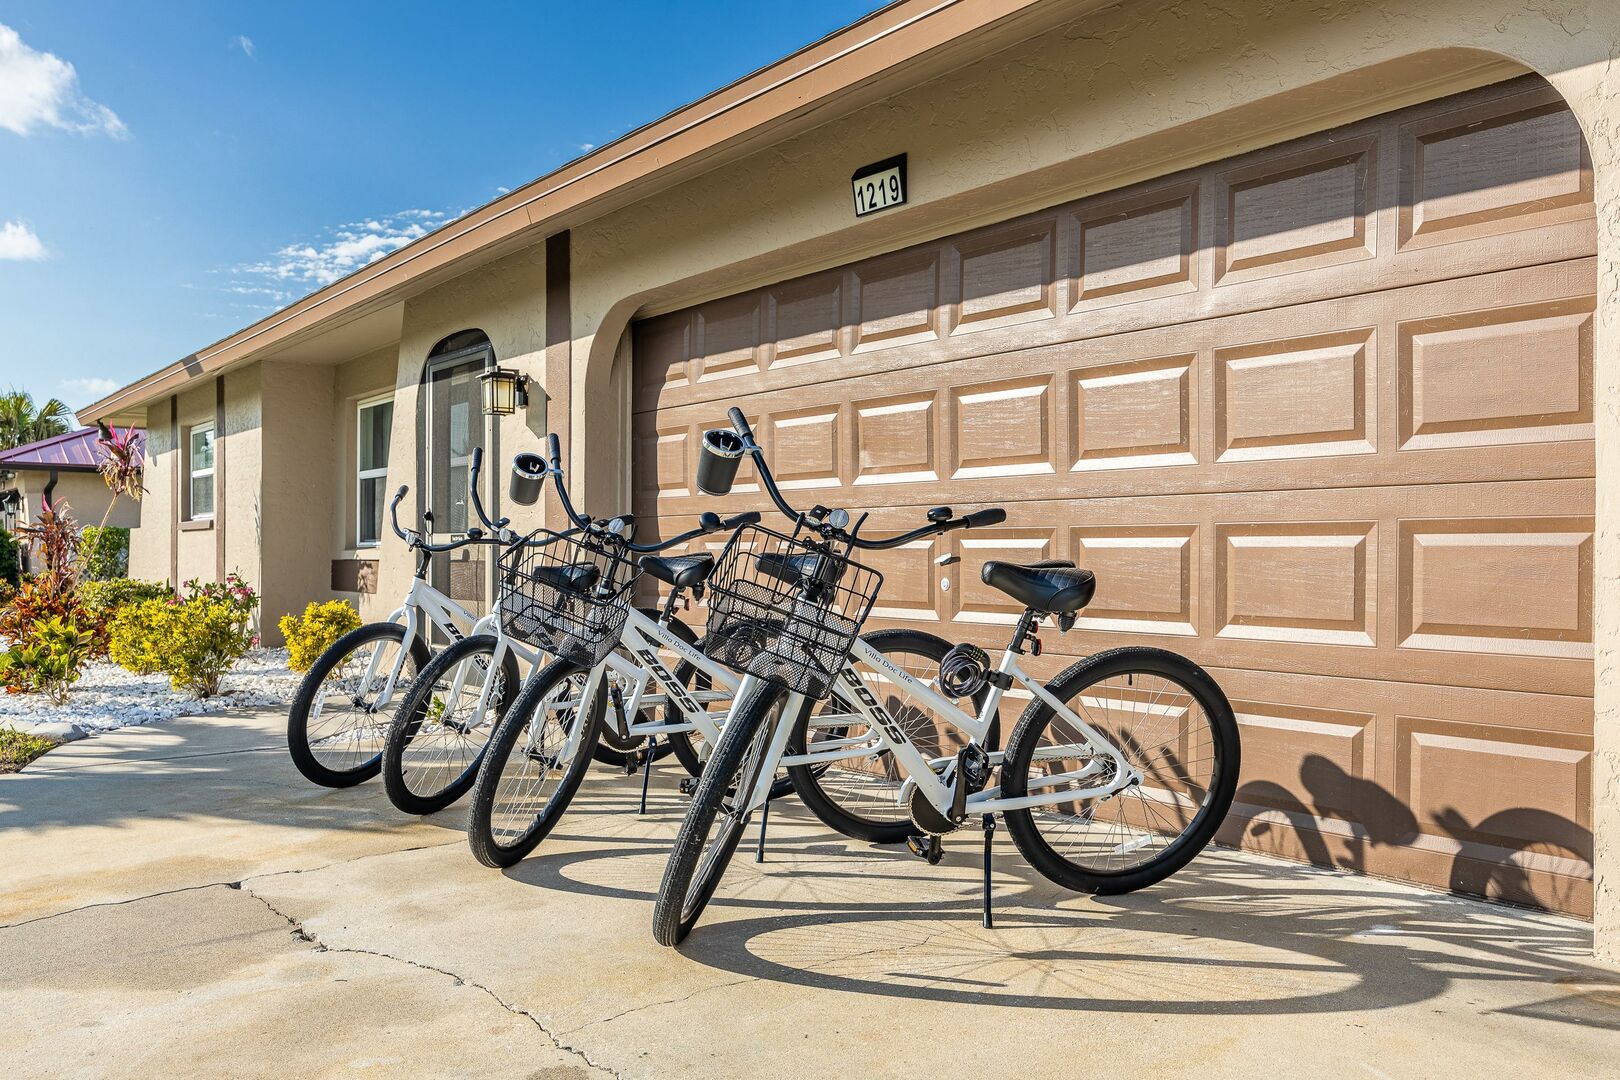 Vacation rental with bikes